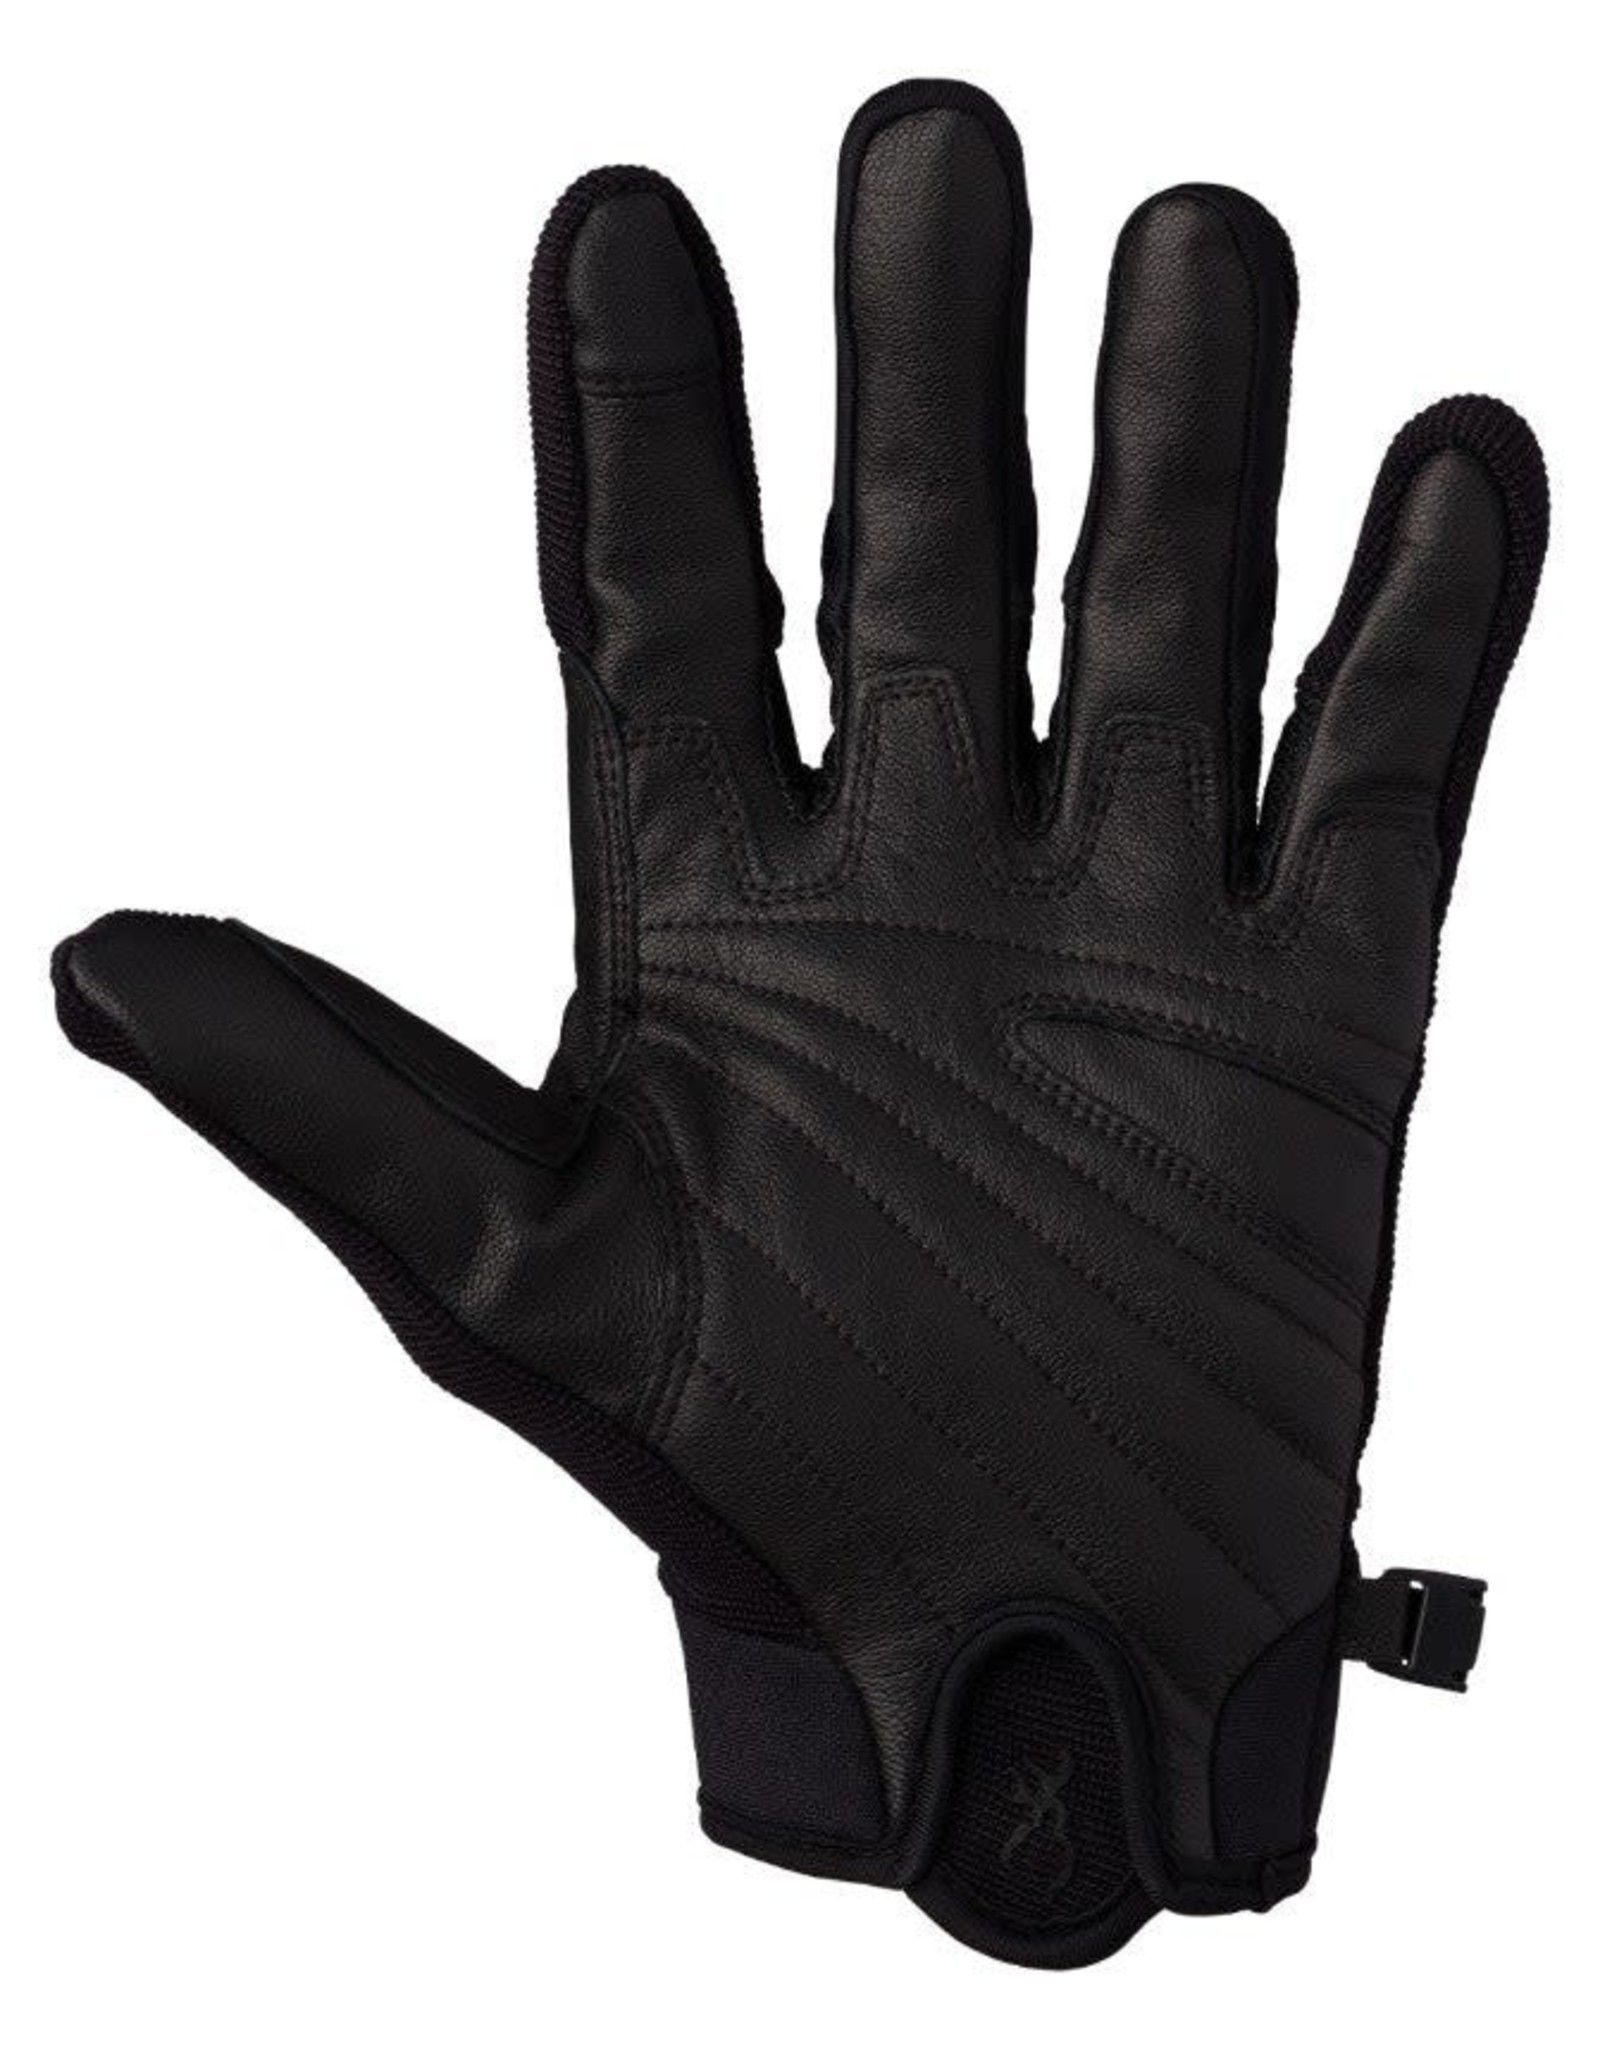 Browning Ace Shooting Glove - Volt - LG